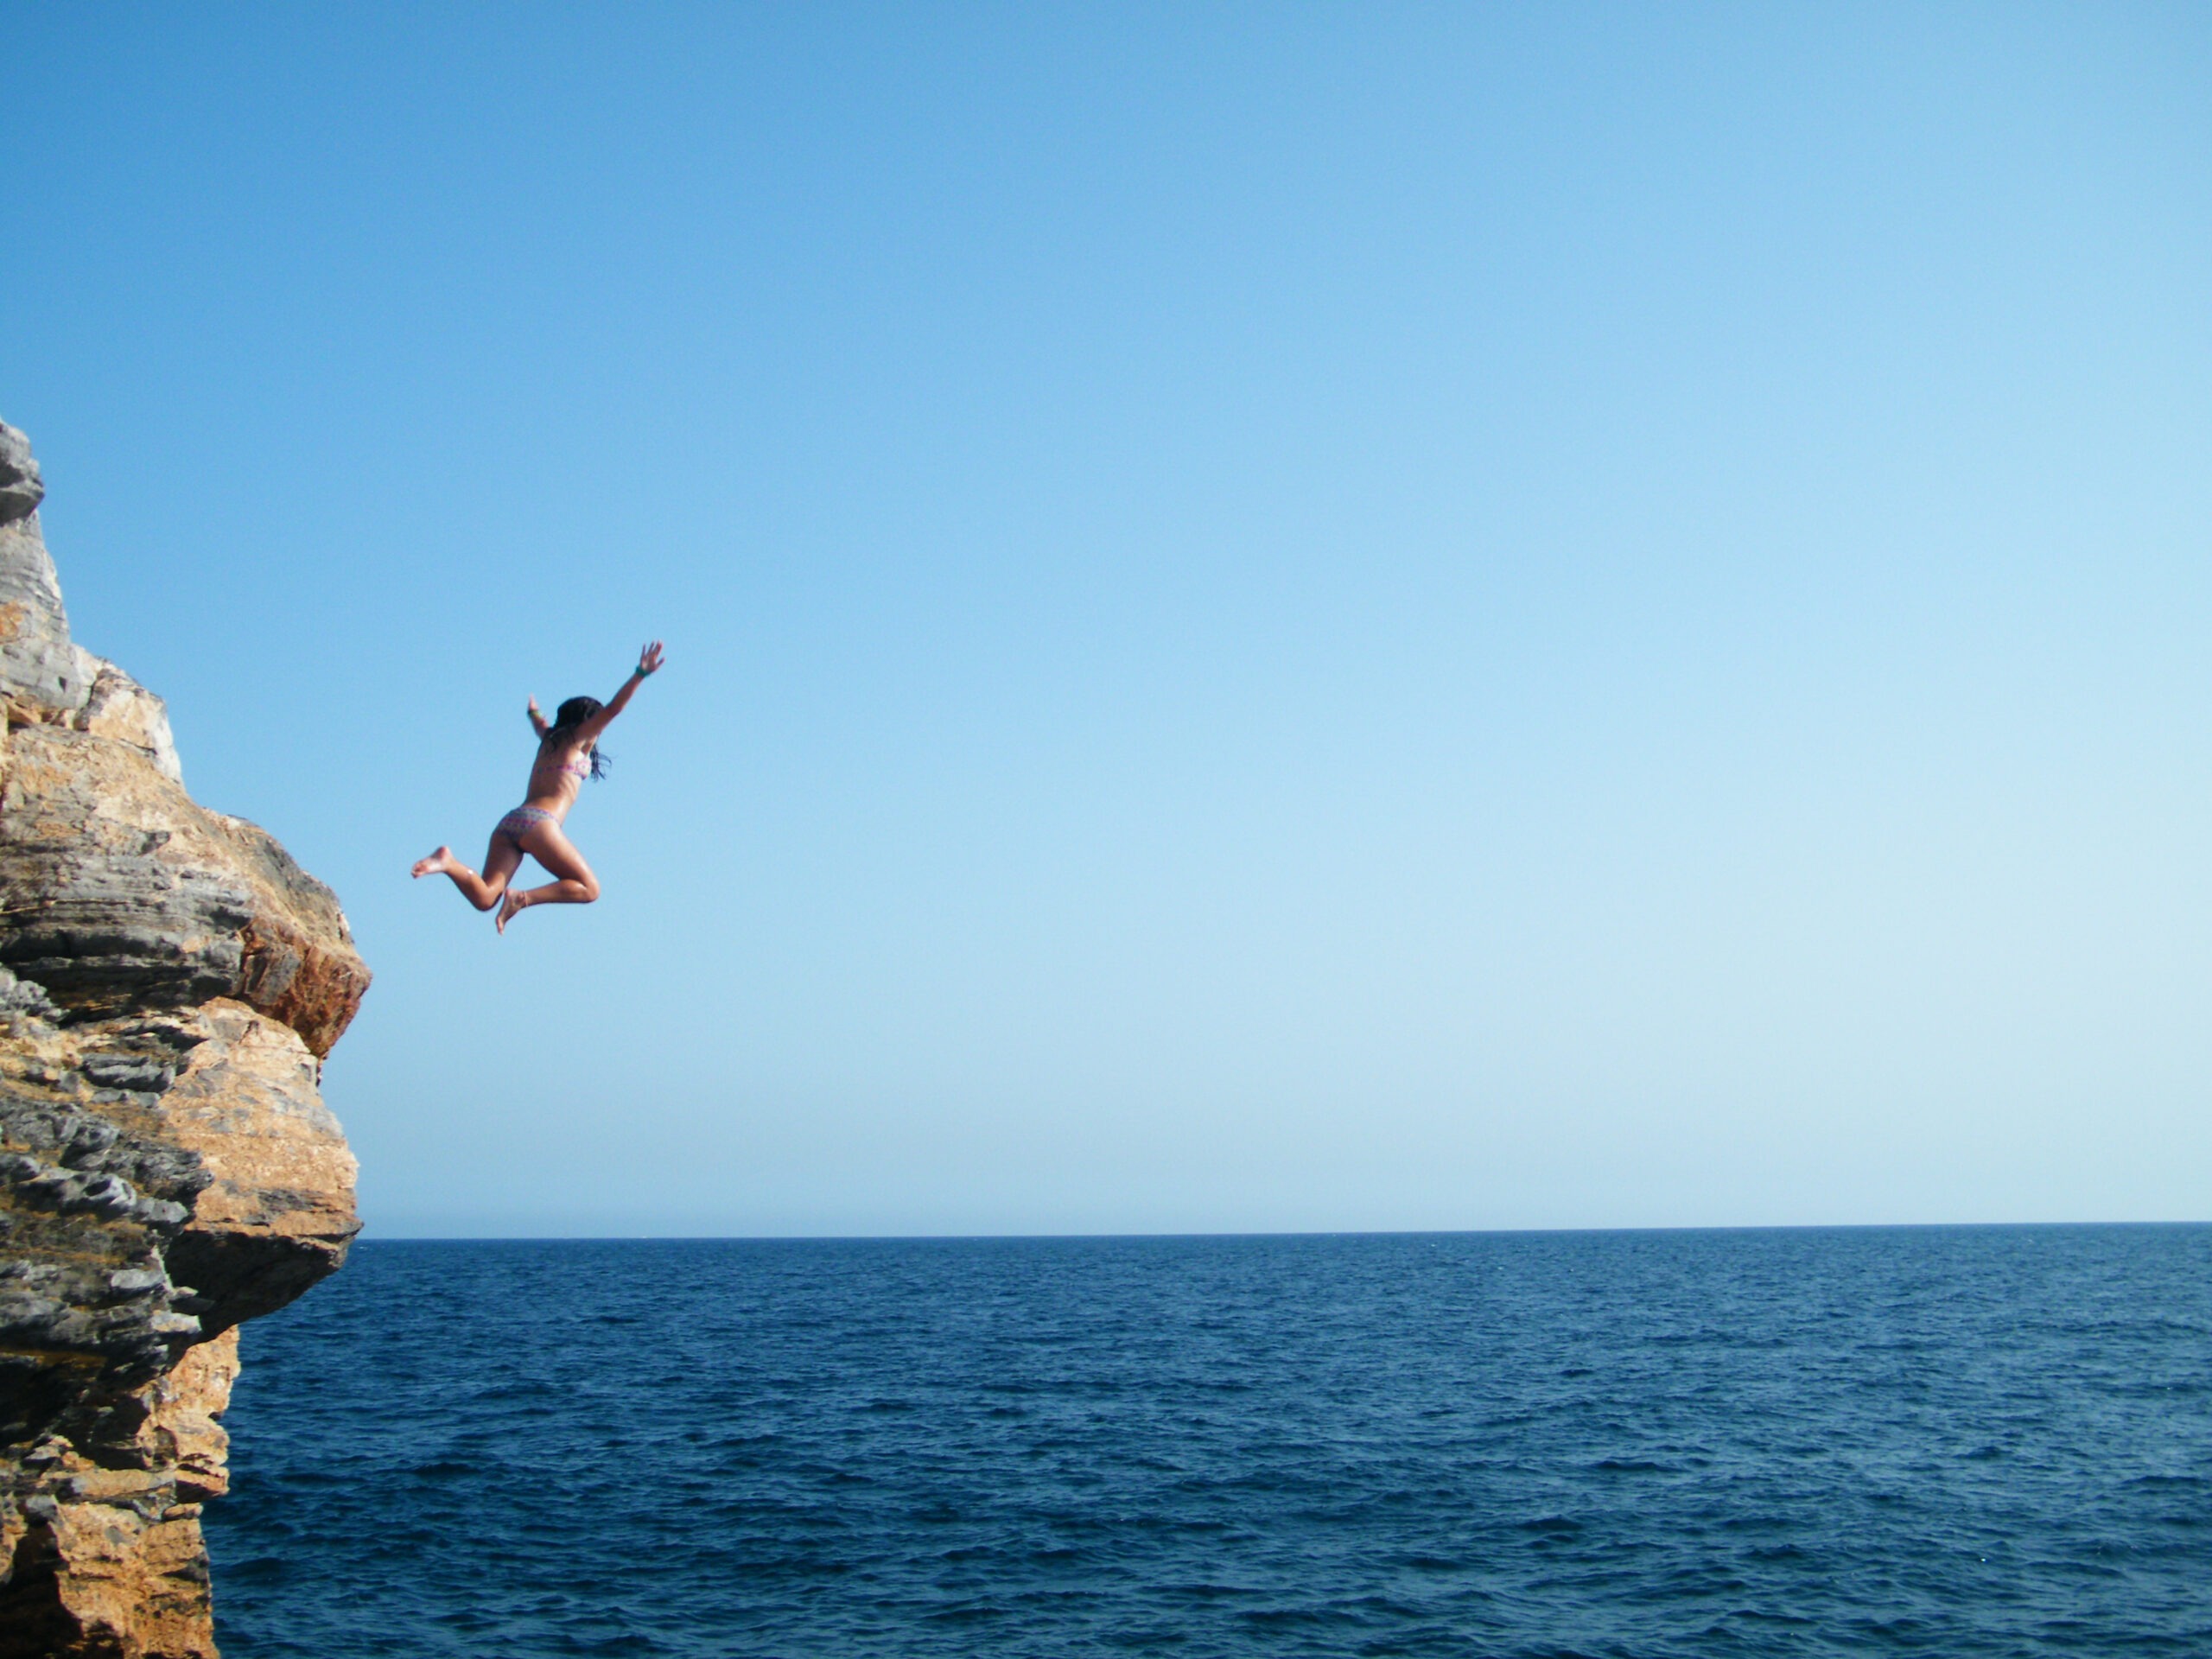 a-young-person-jumping-into-the-sea-from-the-rocks